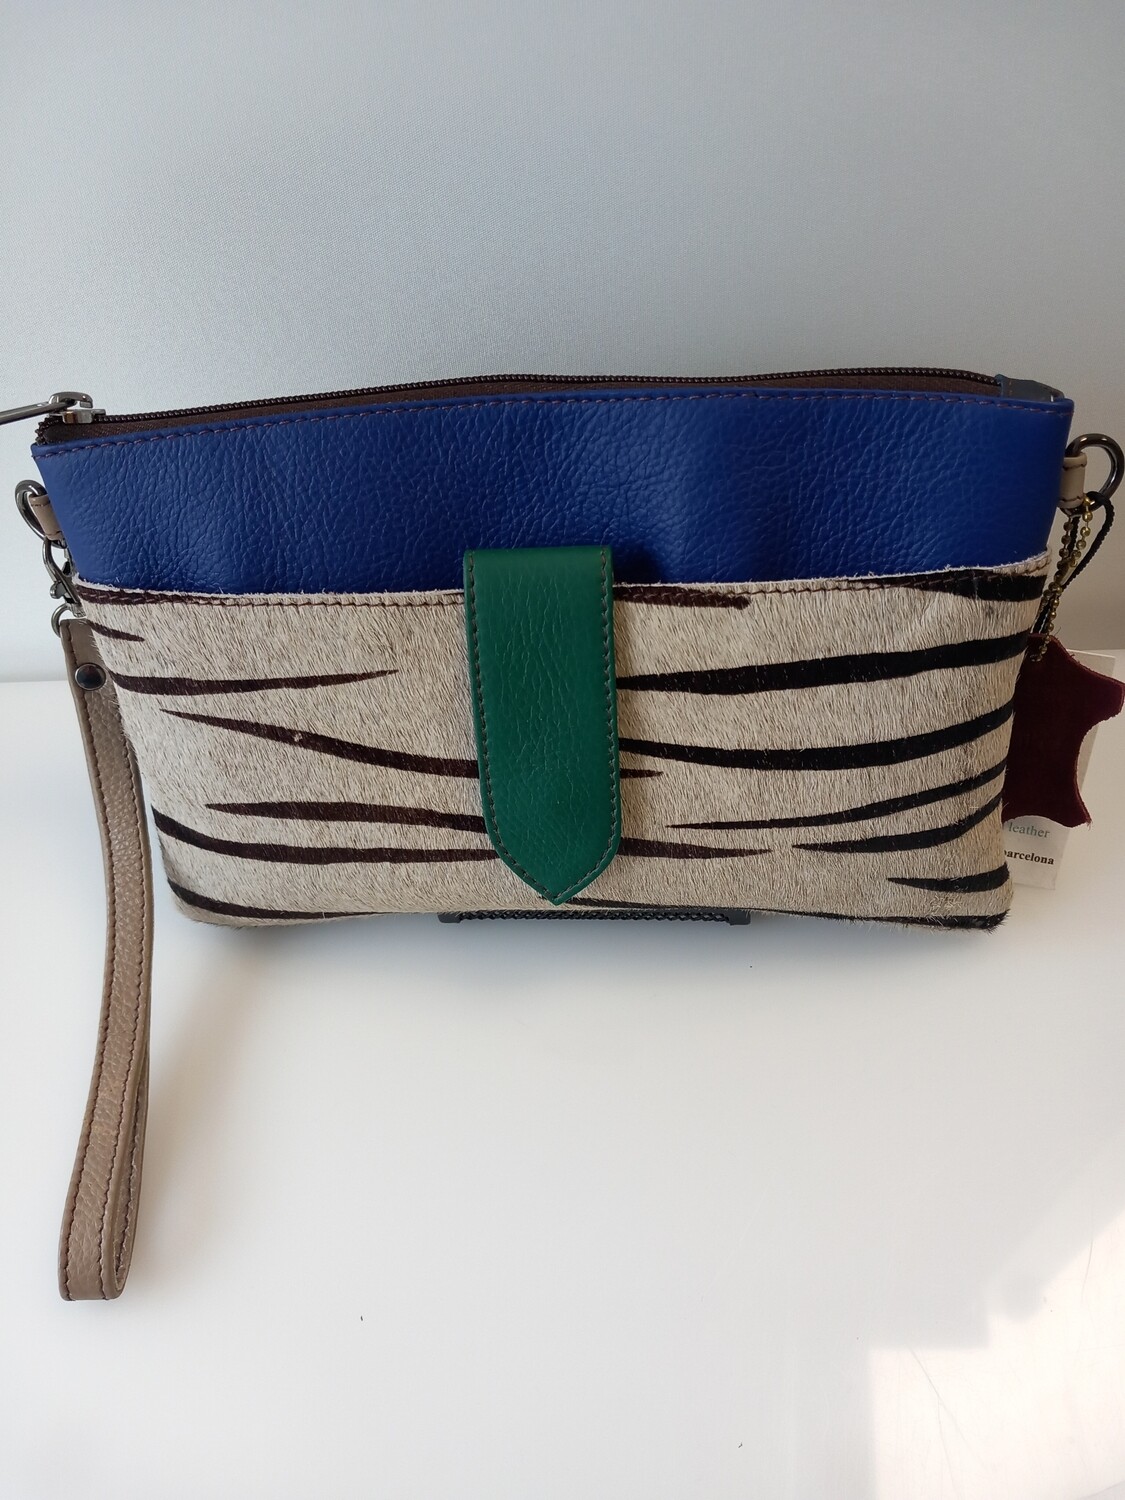 SORUKA Handcrafted & Sustainable Recycled Leather Bags.